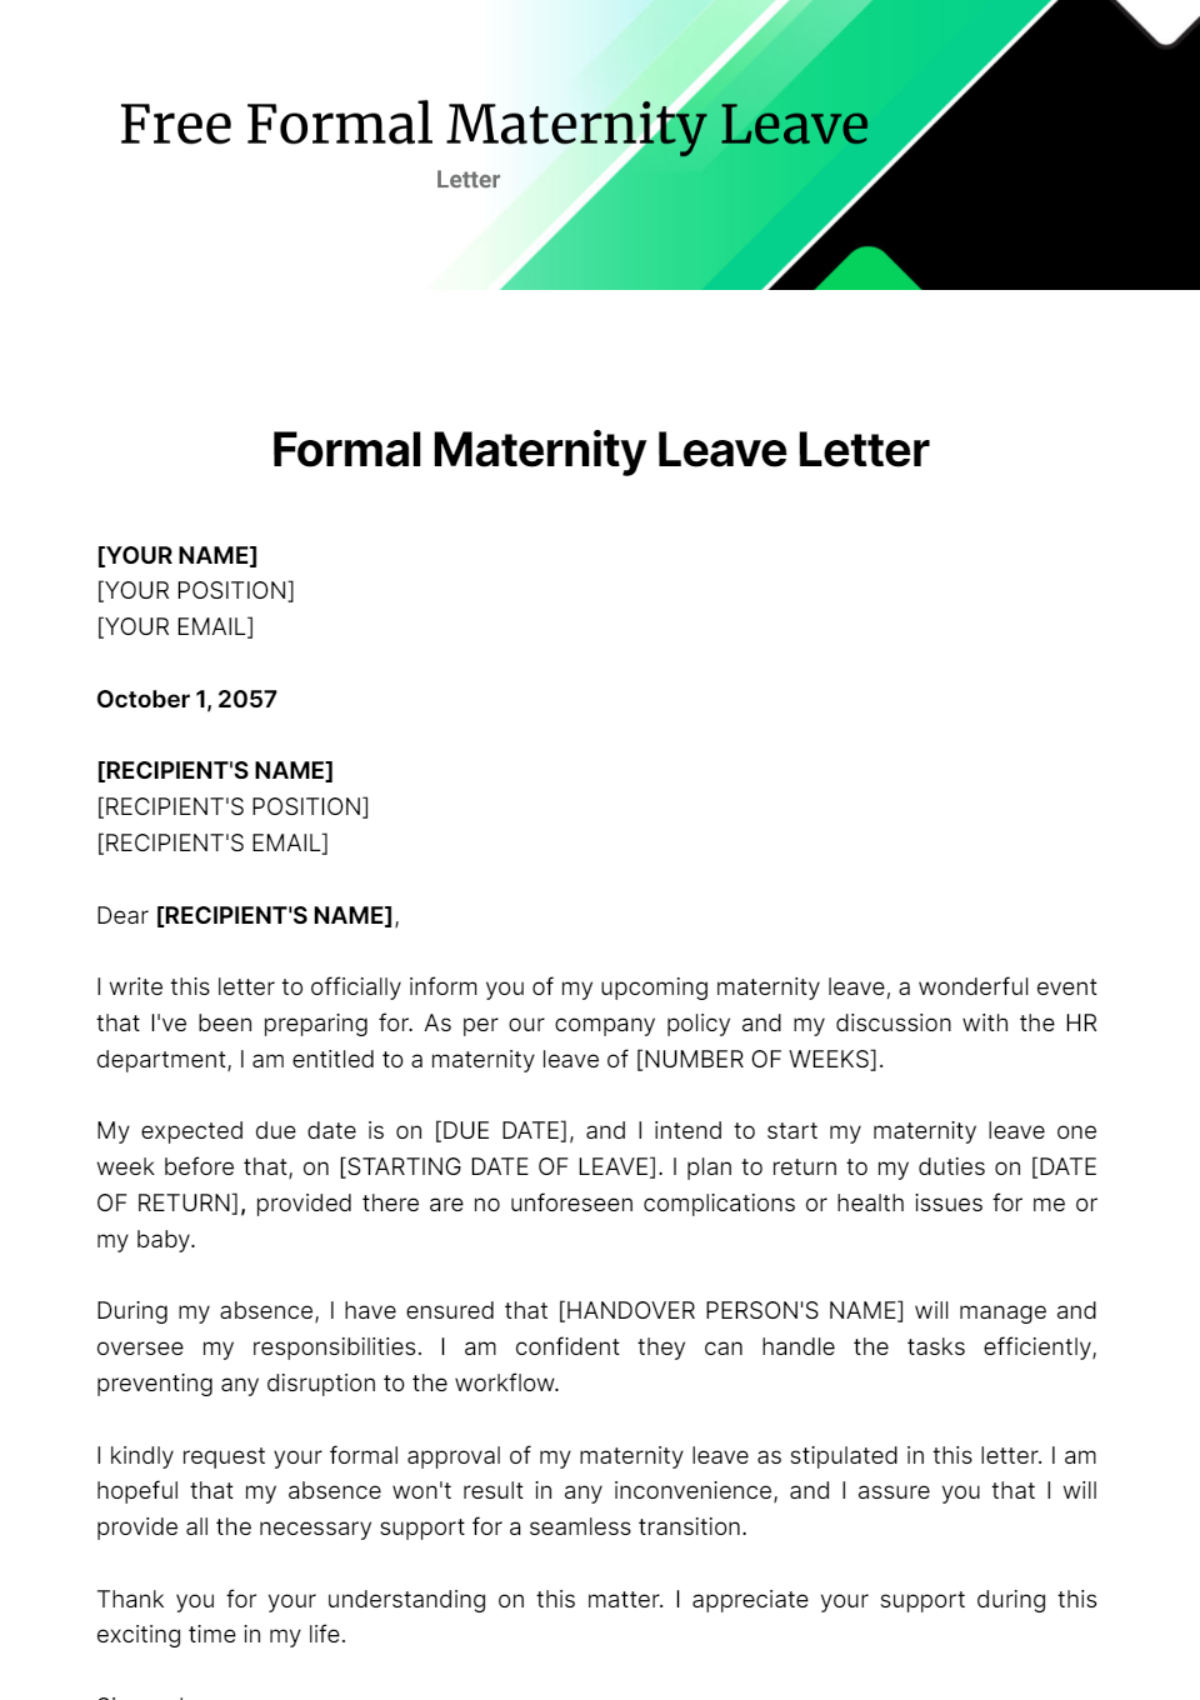 Free Formal Maternity Leave Letter Template